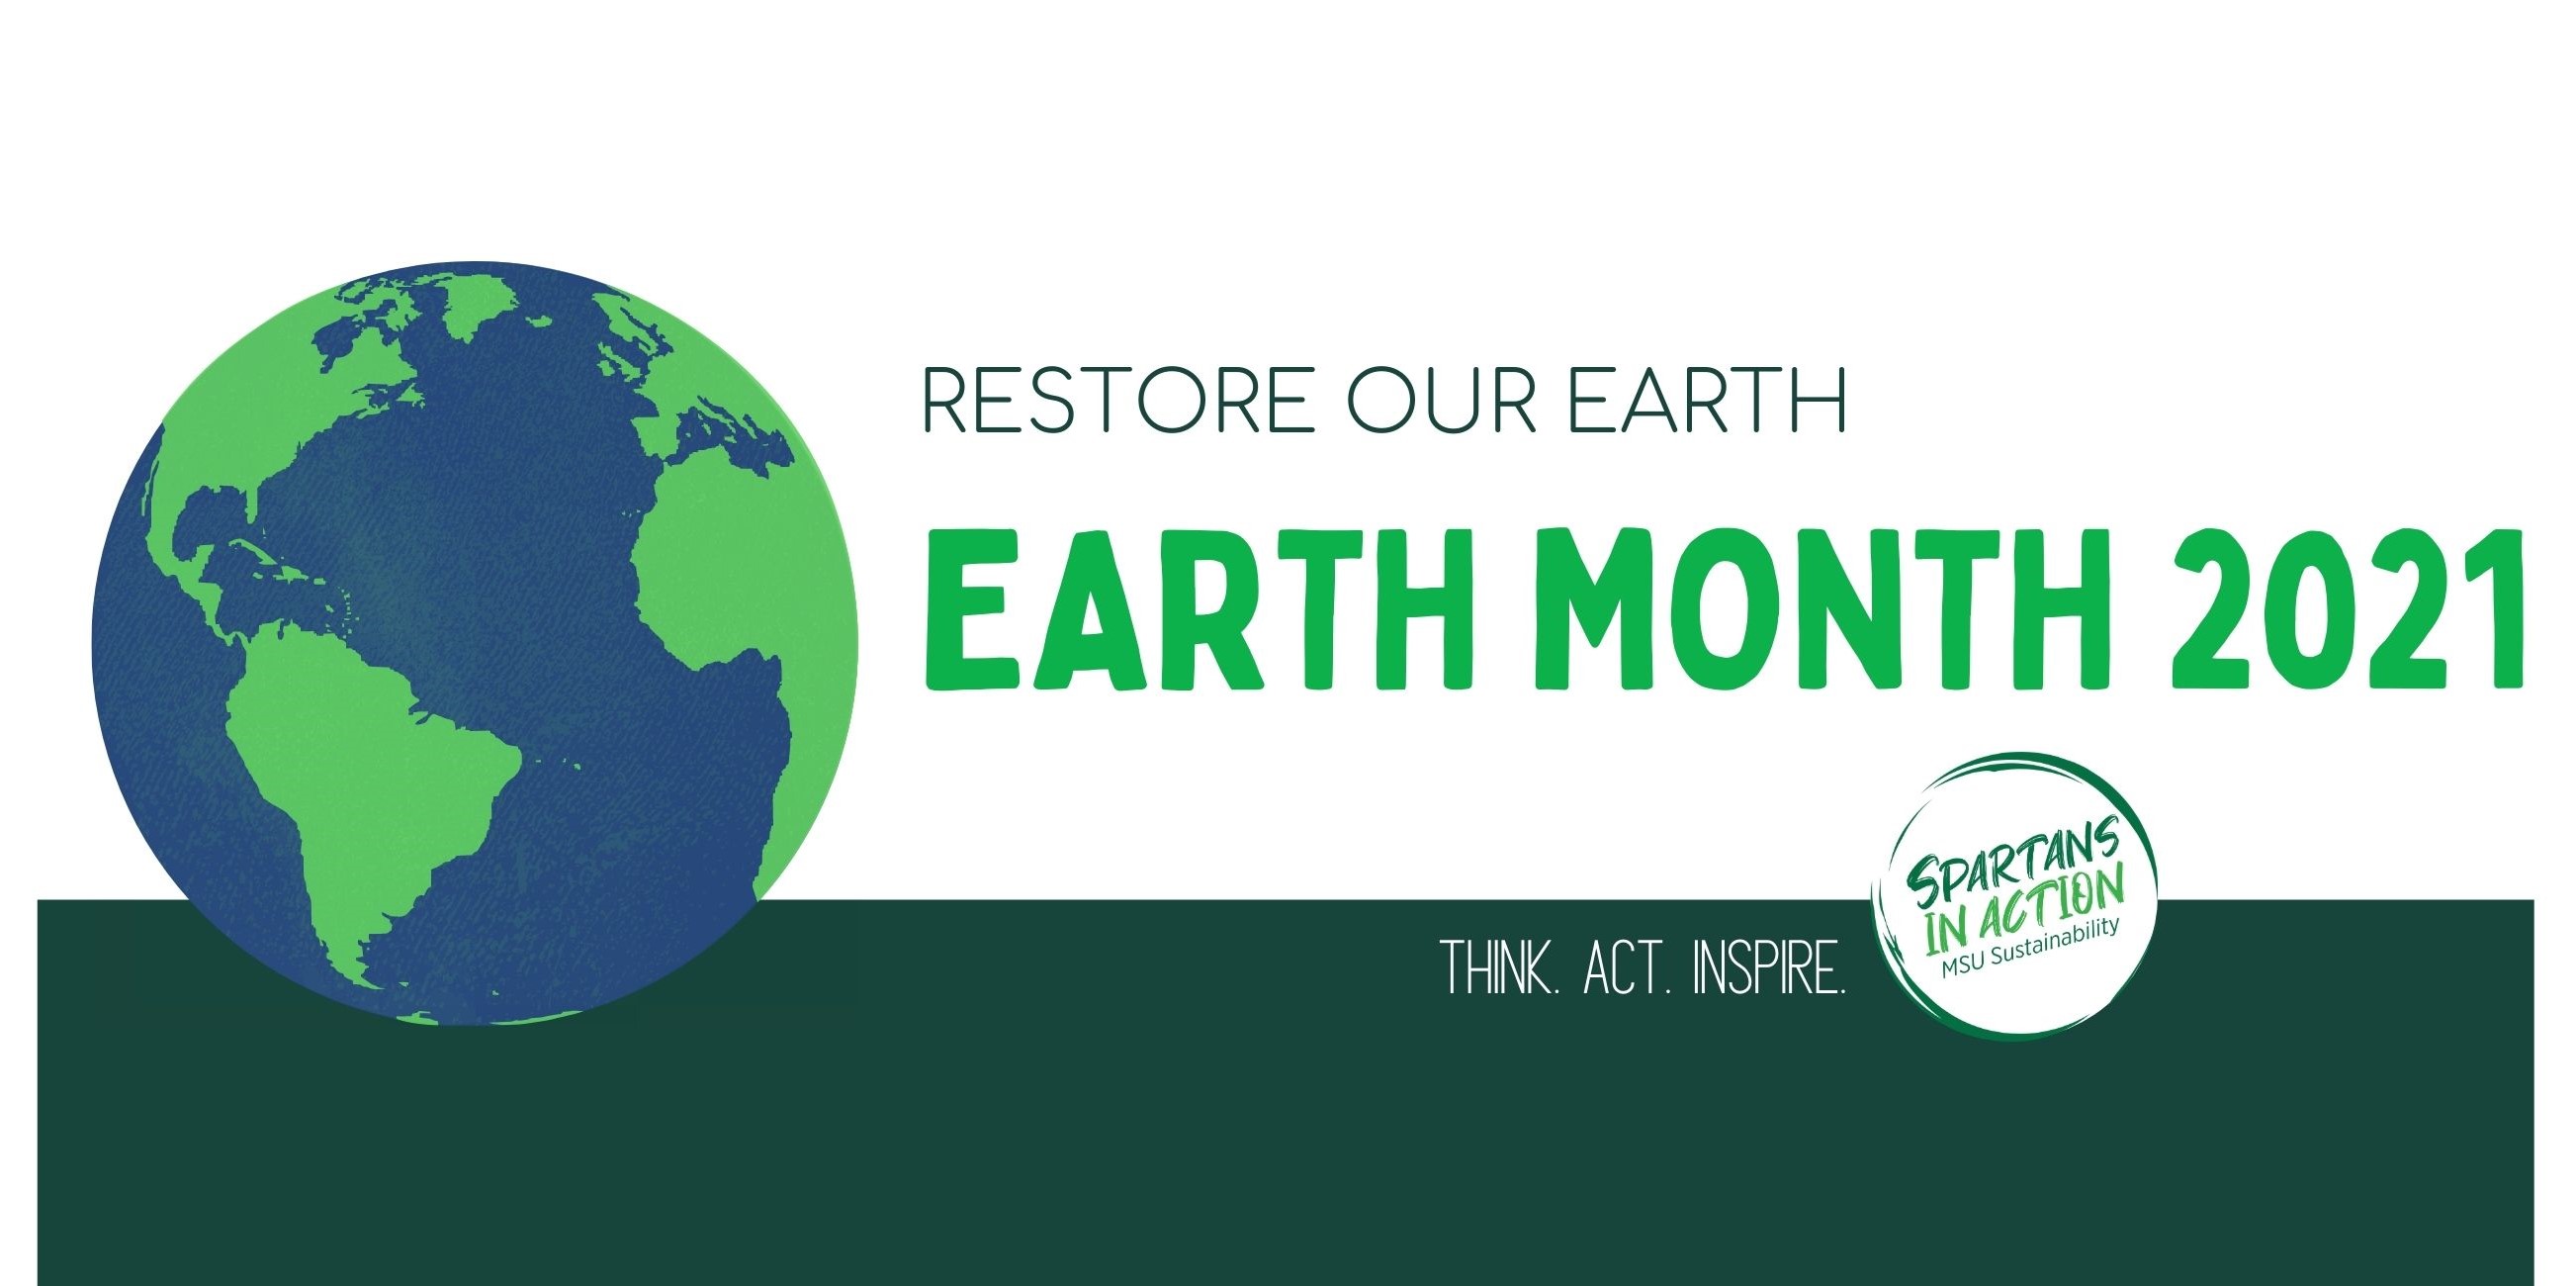 Earth Month 2021 Restore Our Earth with Earth Graphic